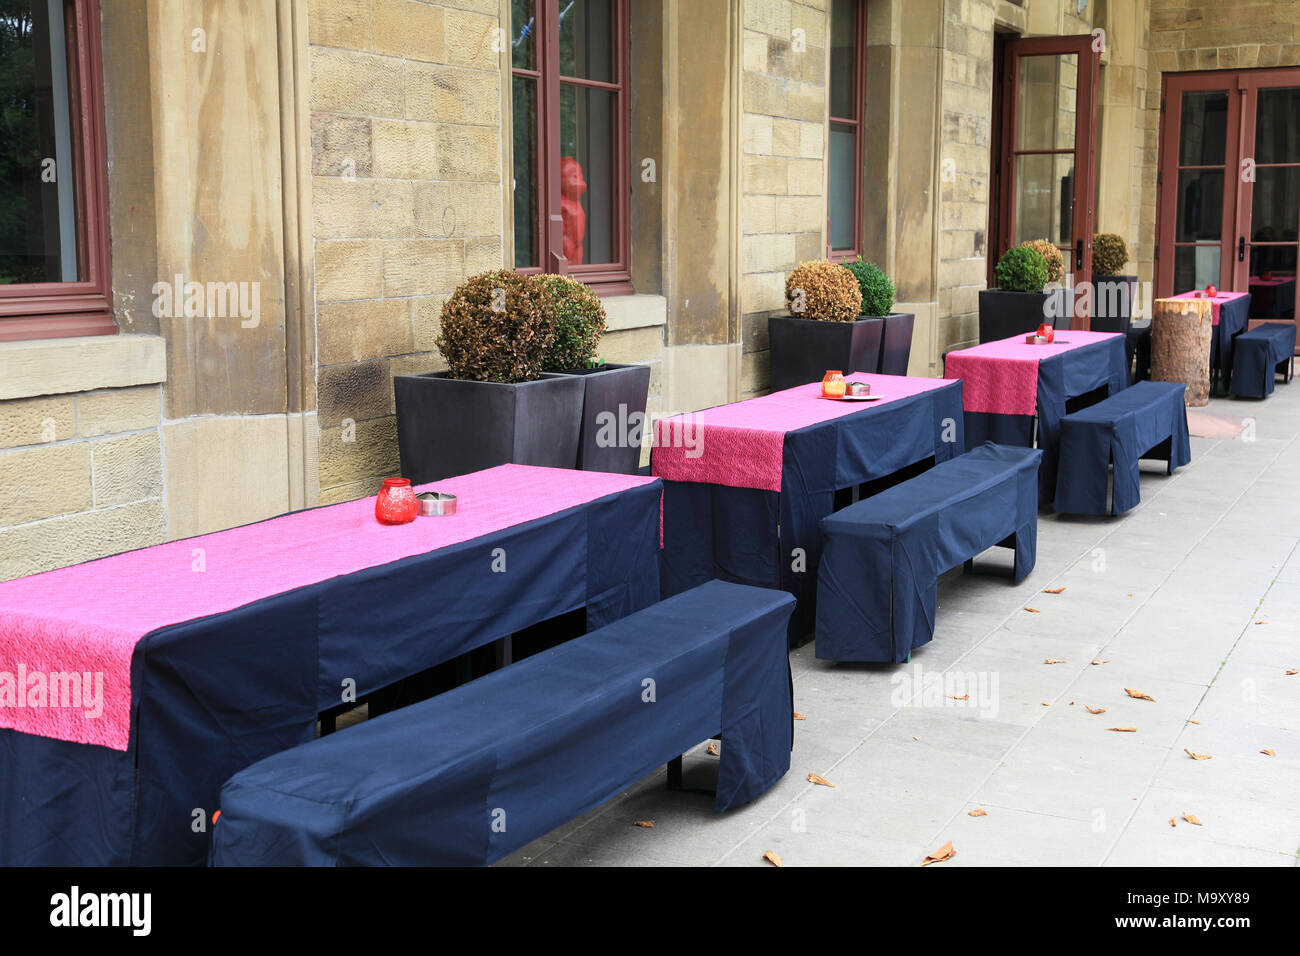 Outdoor furniture tables and benches Stock Photo